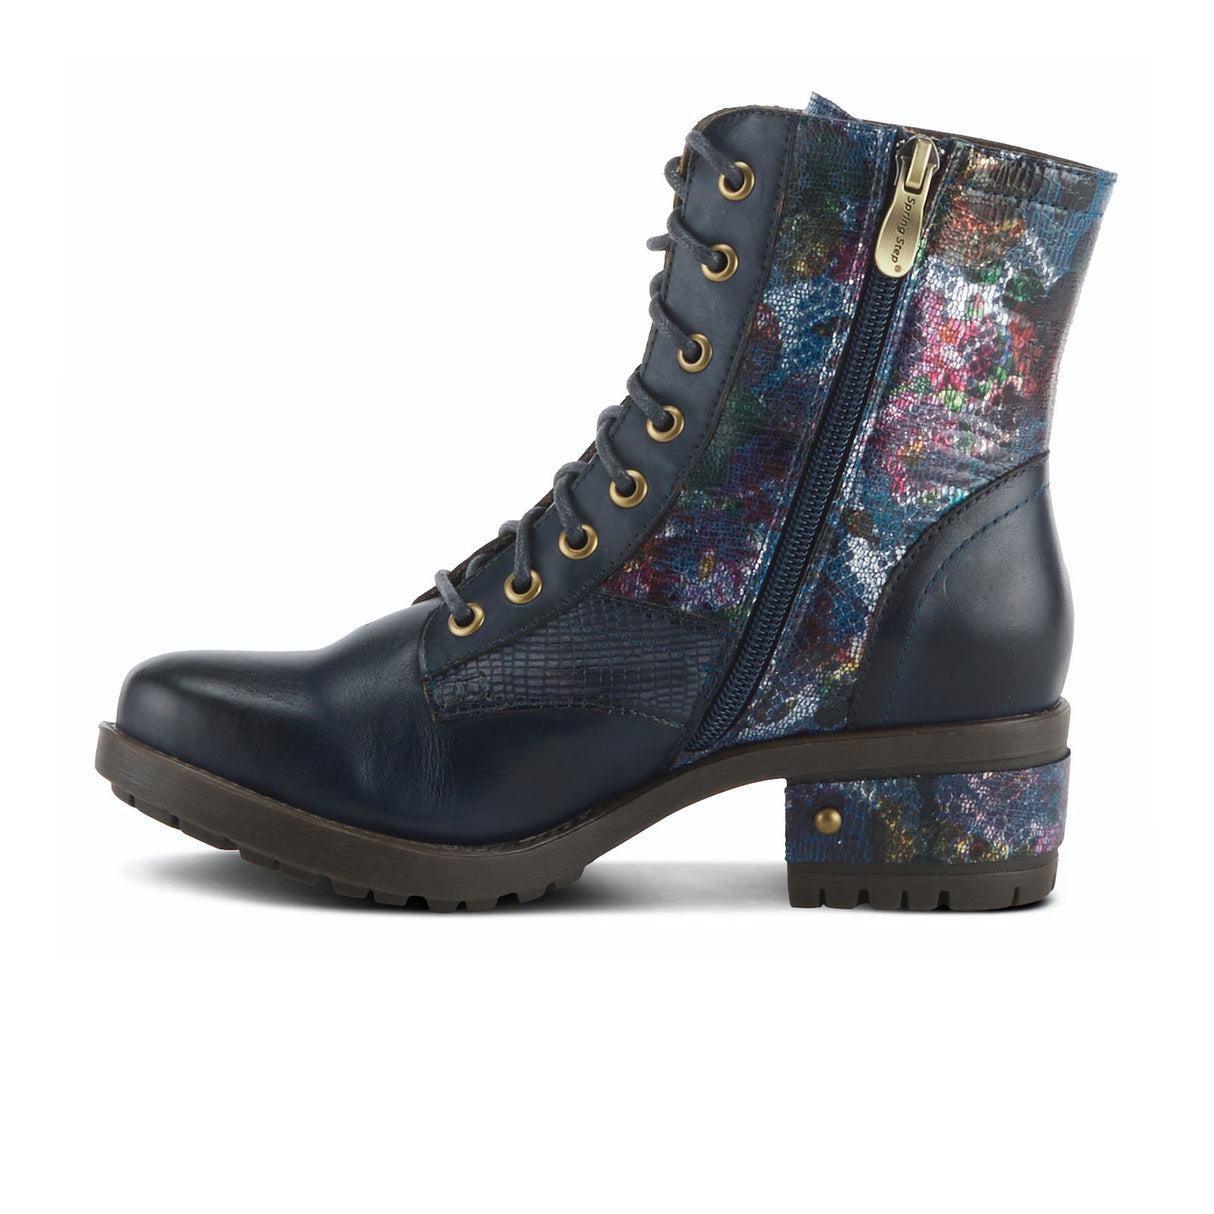 L'Artiste Marty Met Ankle Boot (Women) - Navy Multi Boots - Fashion - Ankle Boot - The Heel Shoe Fitters